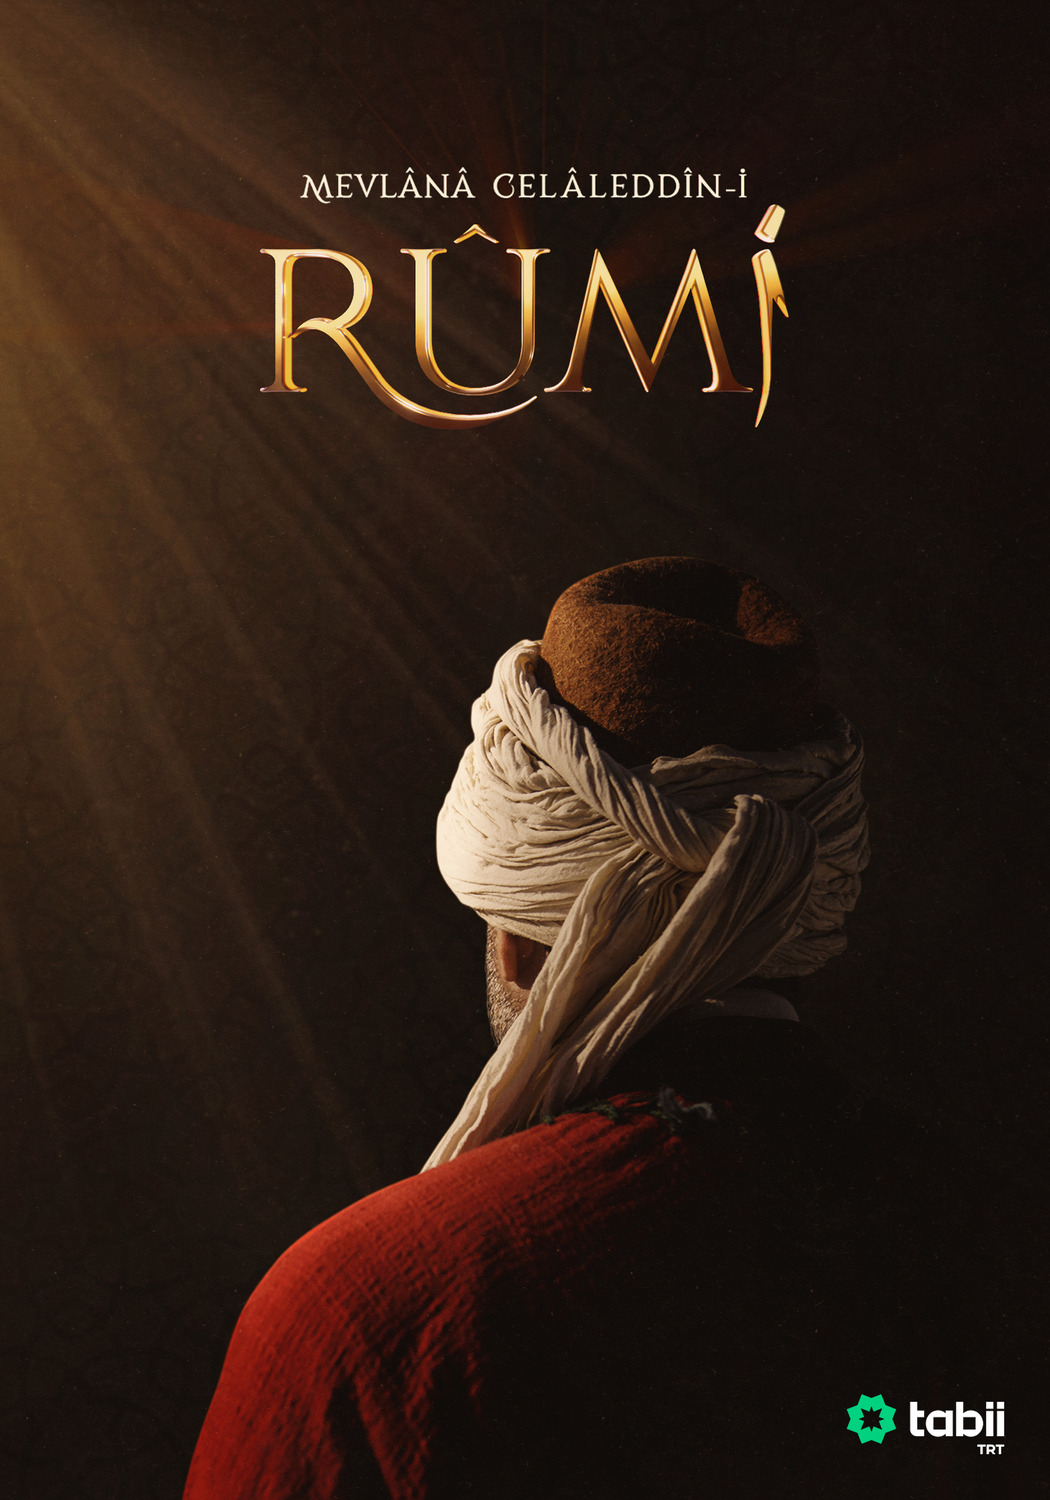 Extra Large TV Poster Image for Rumi 